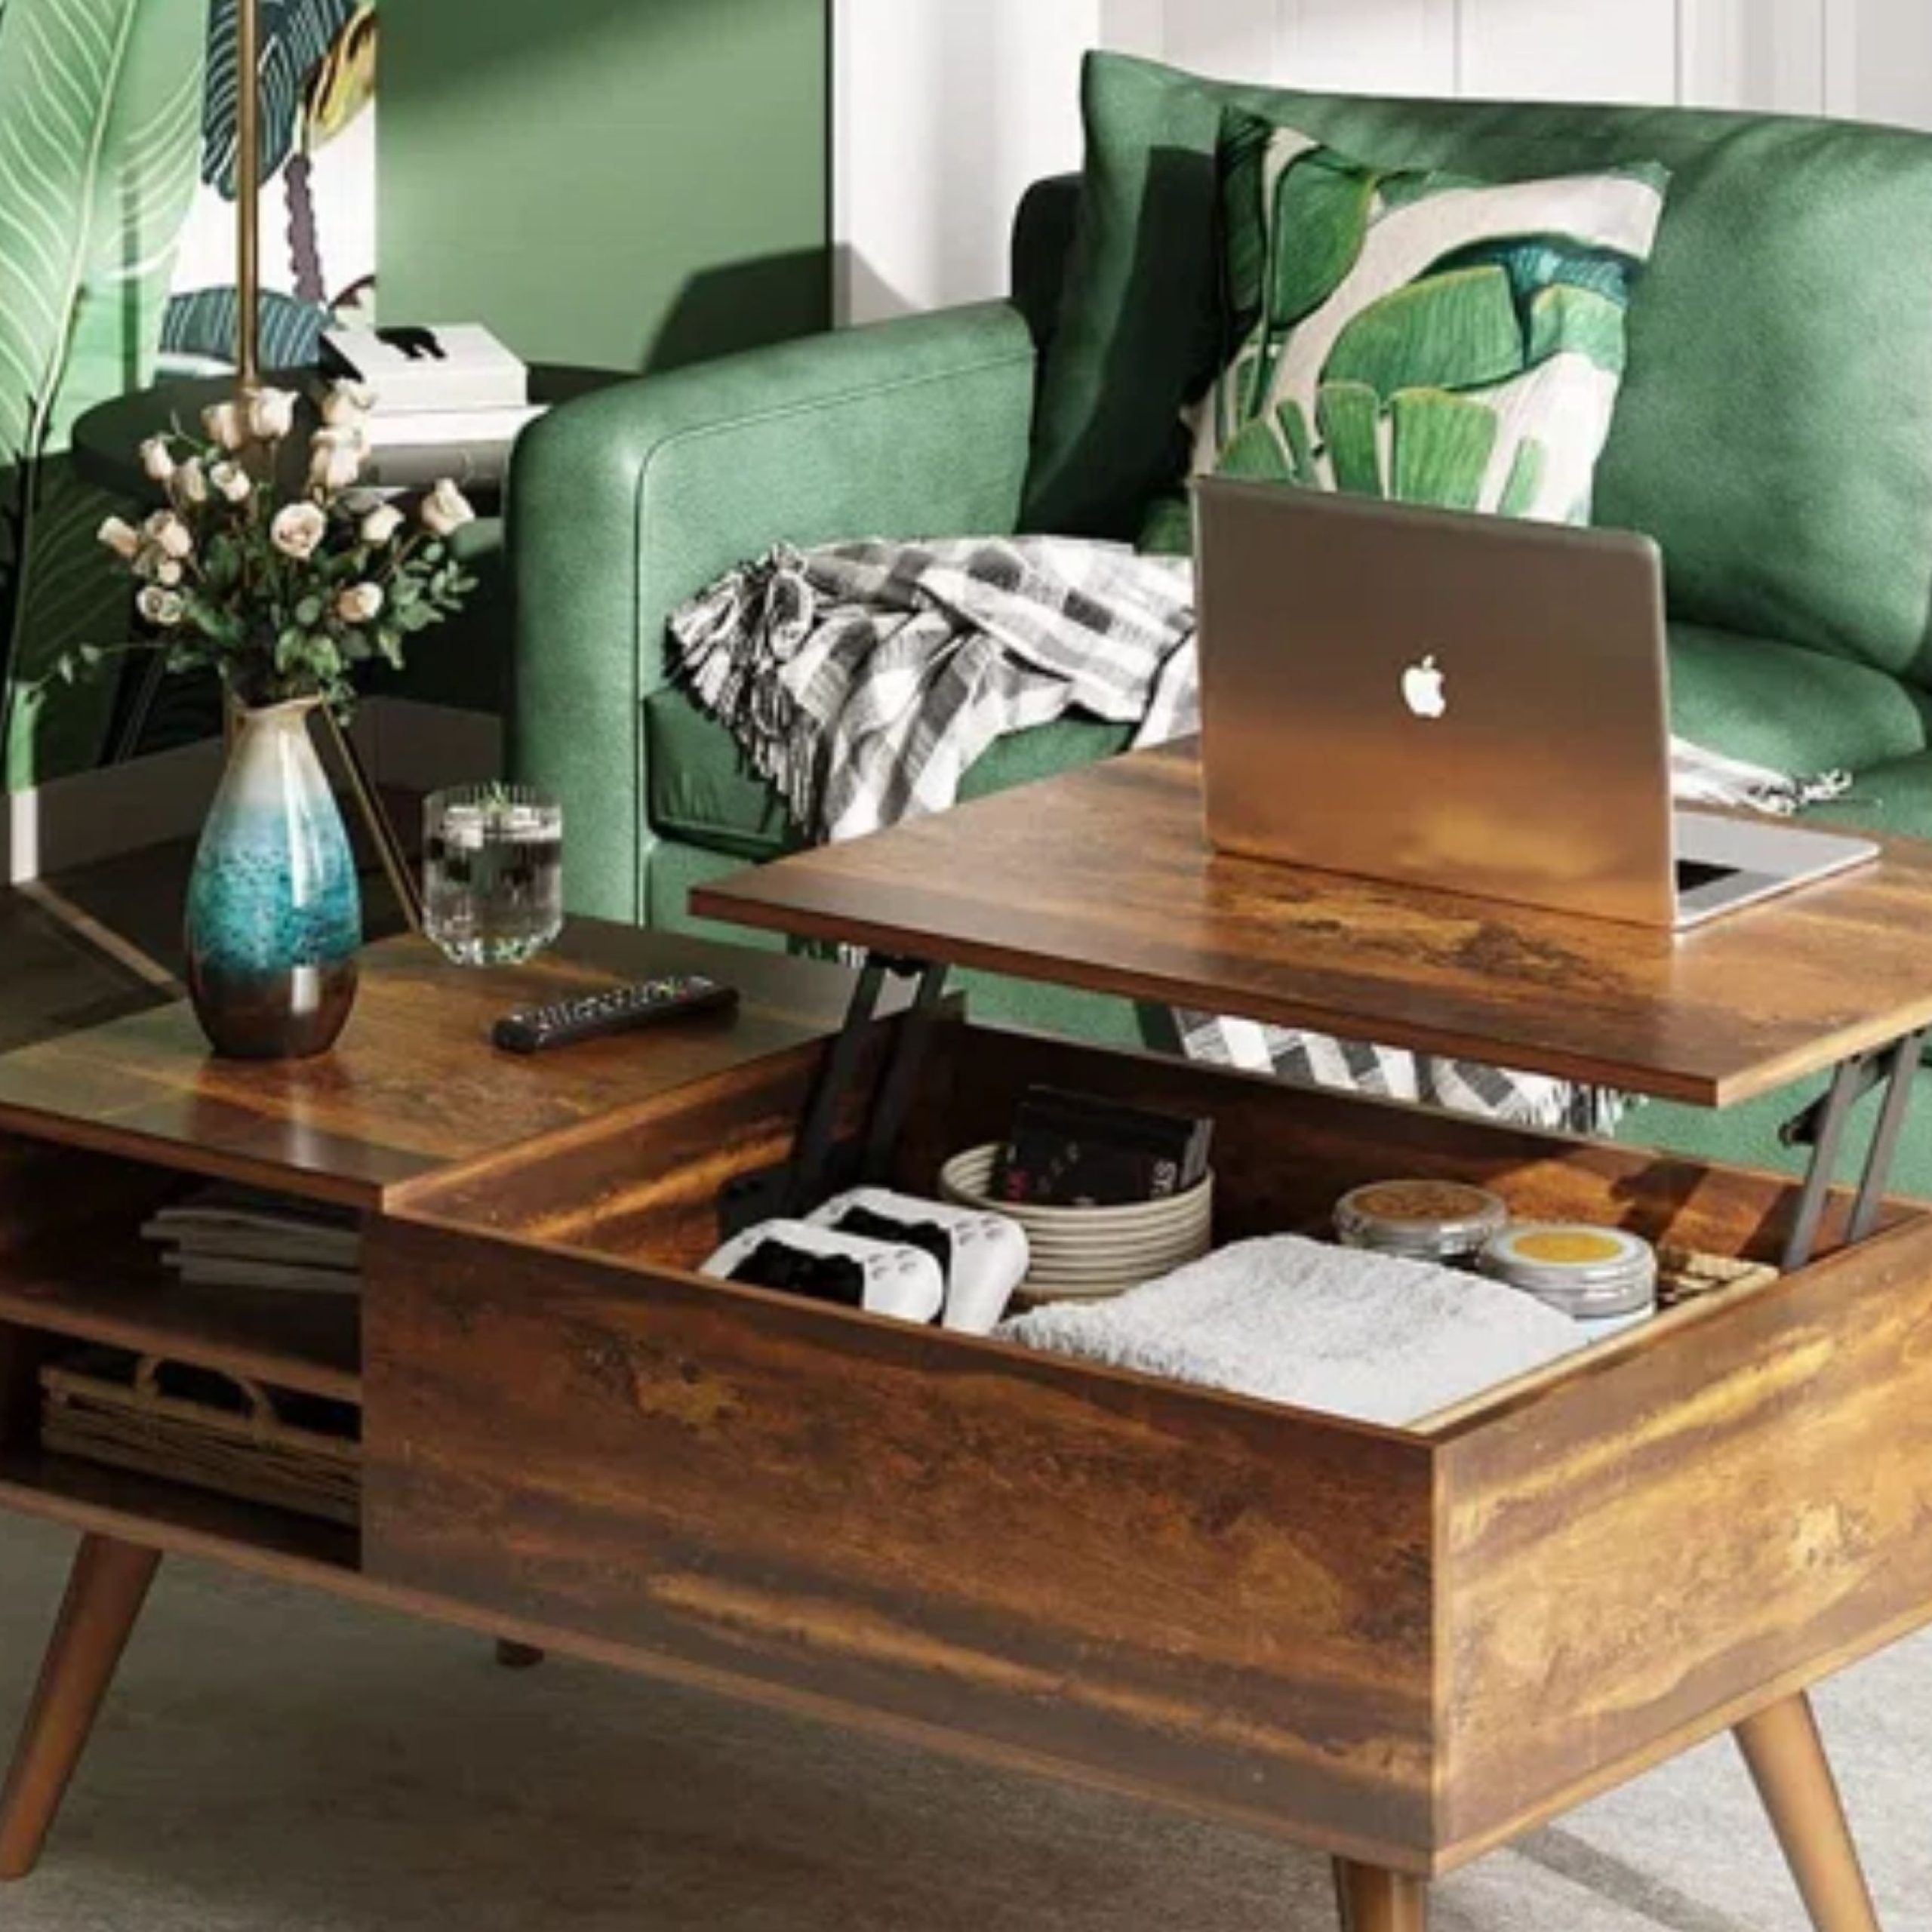 Best Lift Top Coffee Tables: 14 Buys Perfect For Small Spaces | Real Homes Regarding Wood Lift Top Coffee Tables (View 9 of 15)